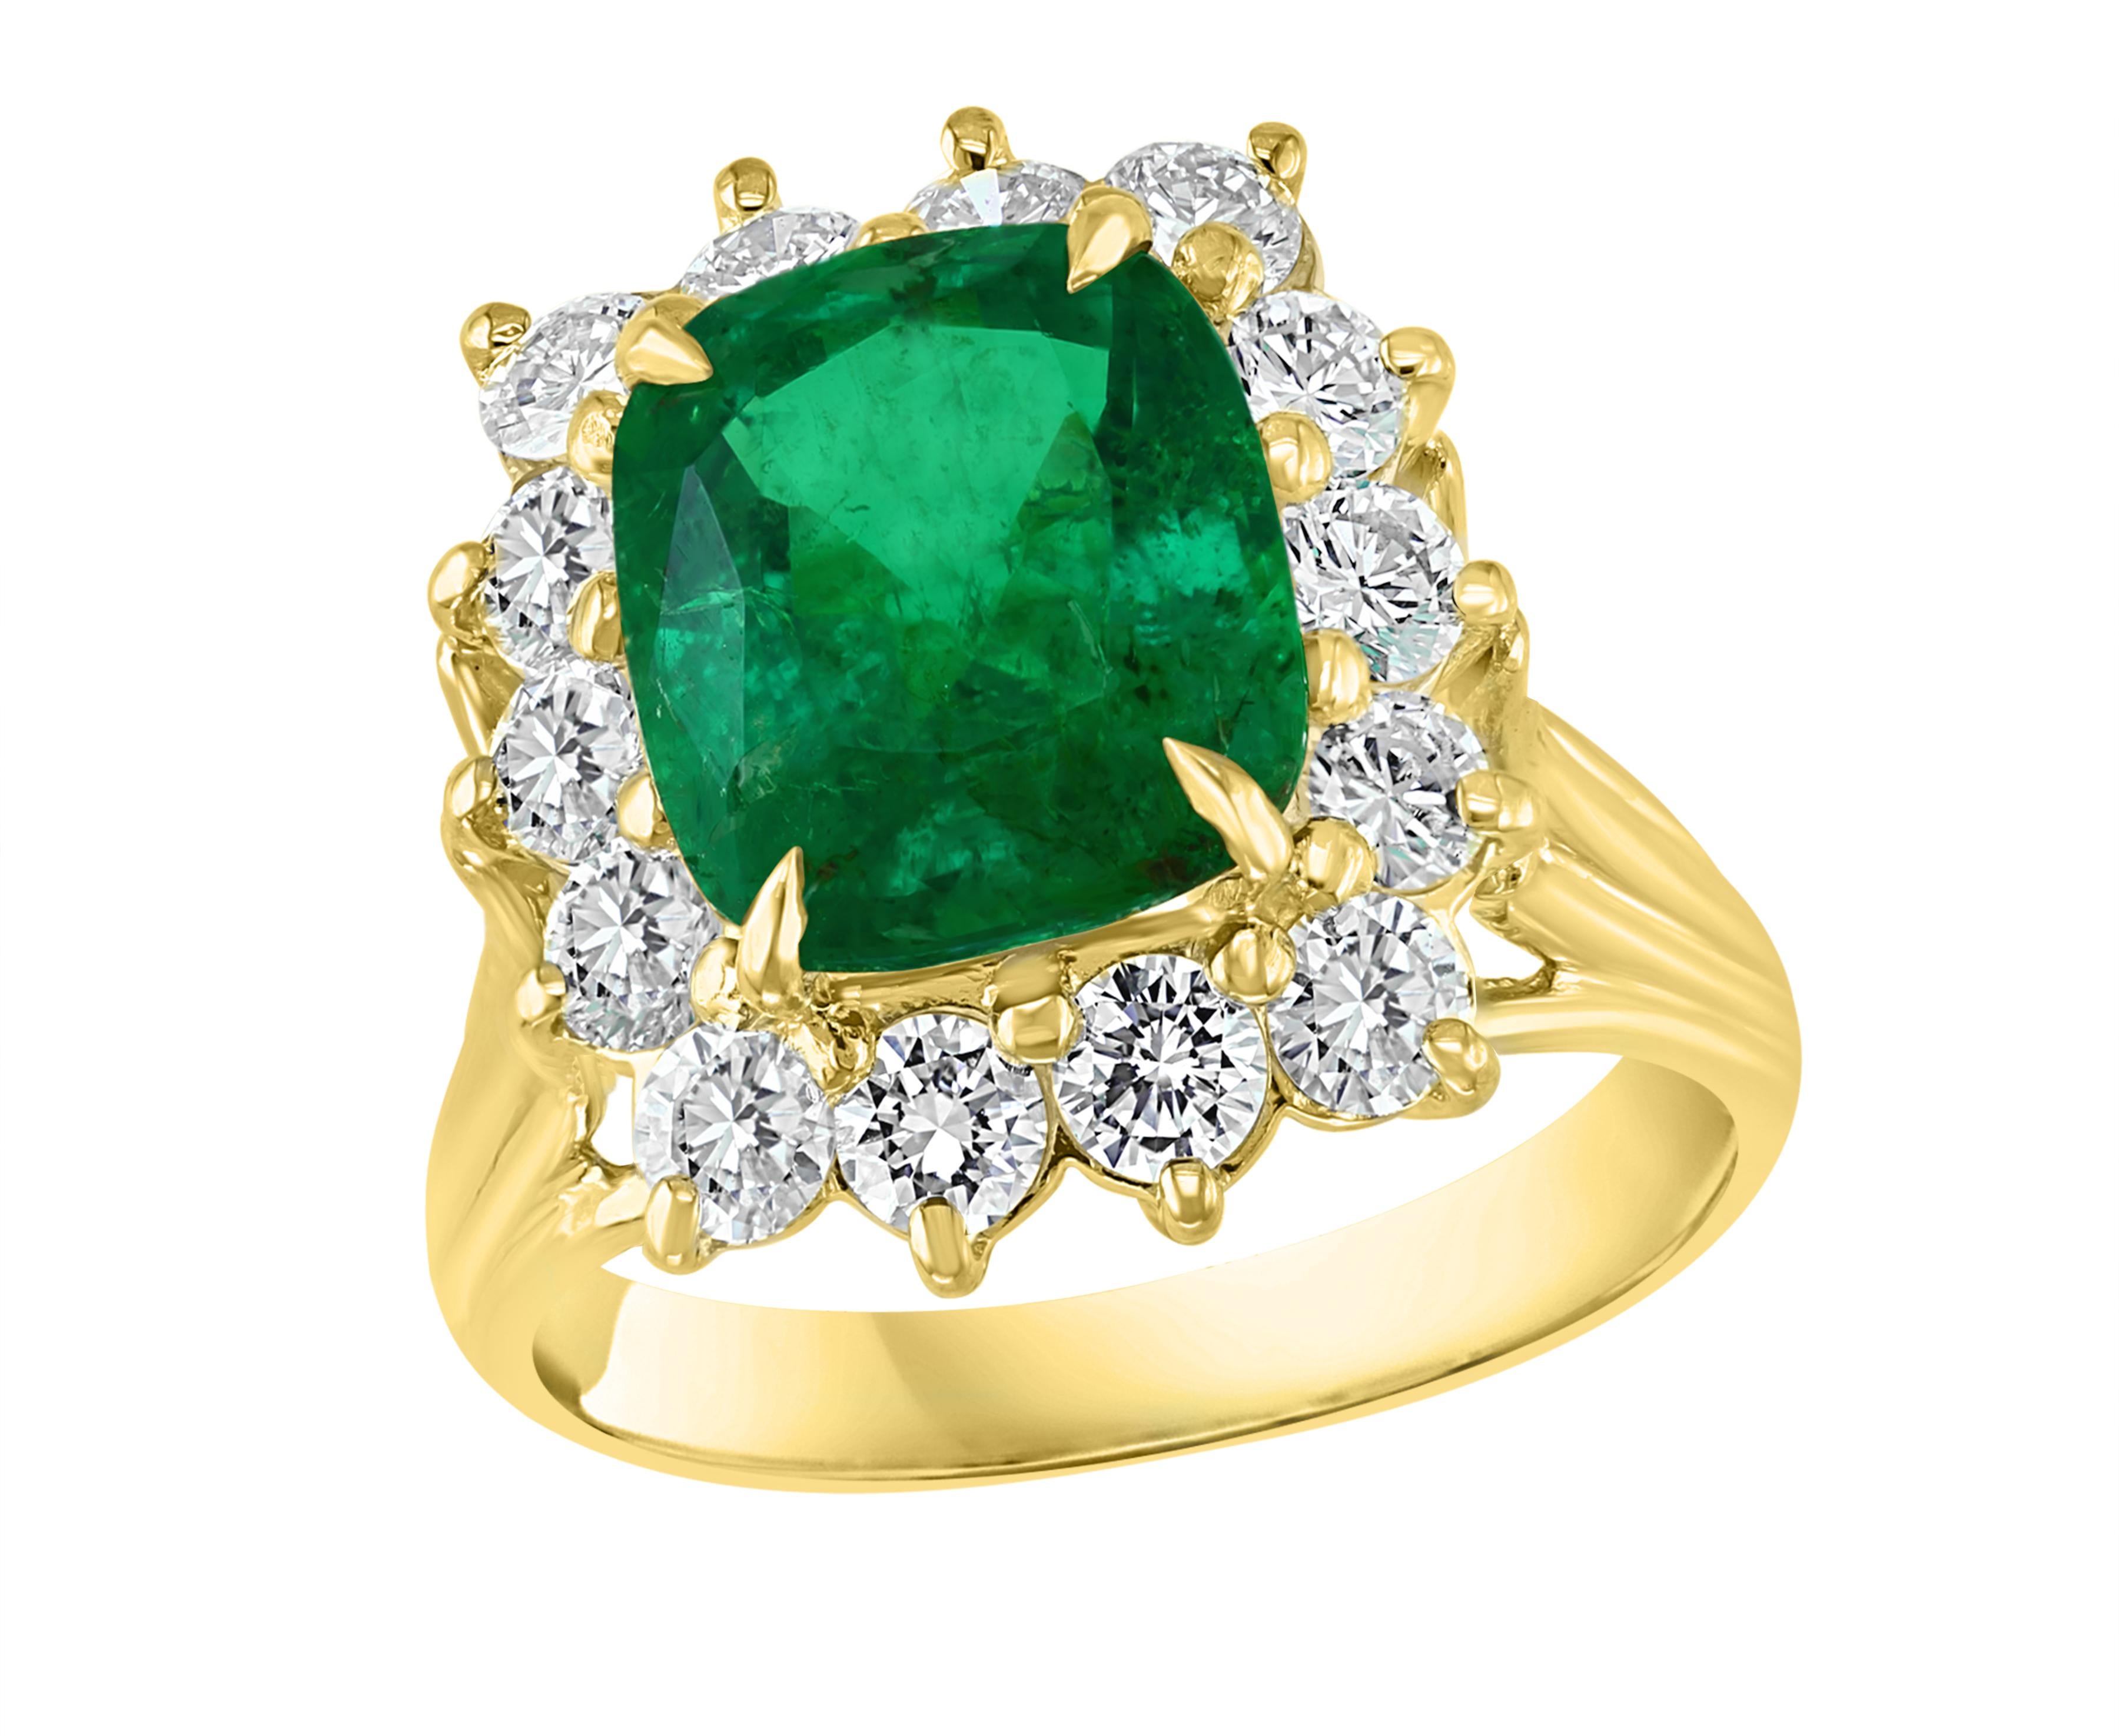 AGL Certified 4.2 Carat Cushion Cut Colombian Emerald & Diamond Ring 18K Y Gold For Sale 10